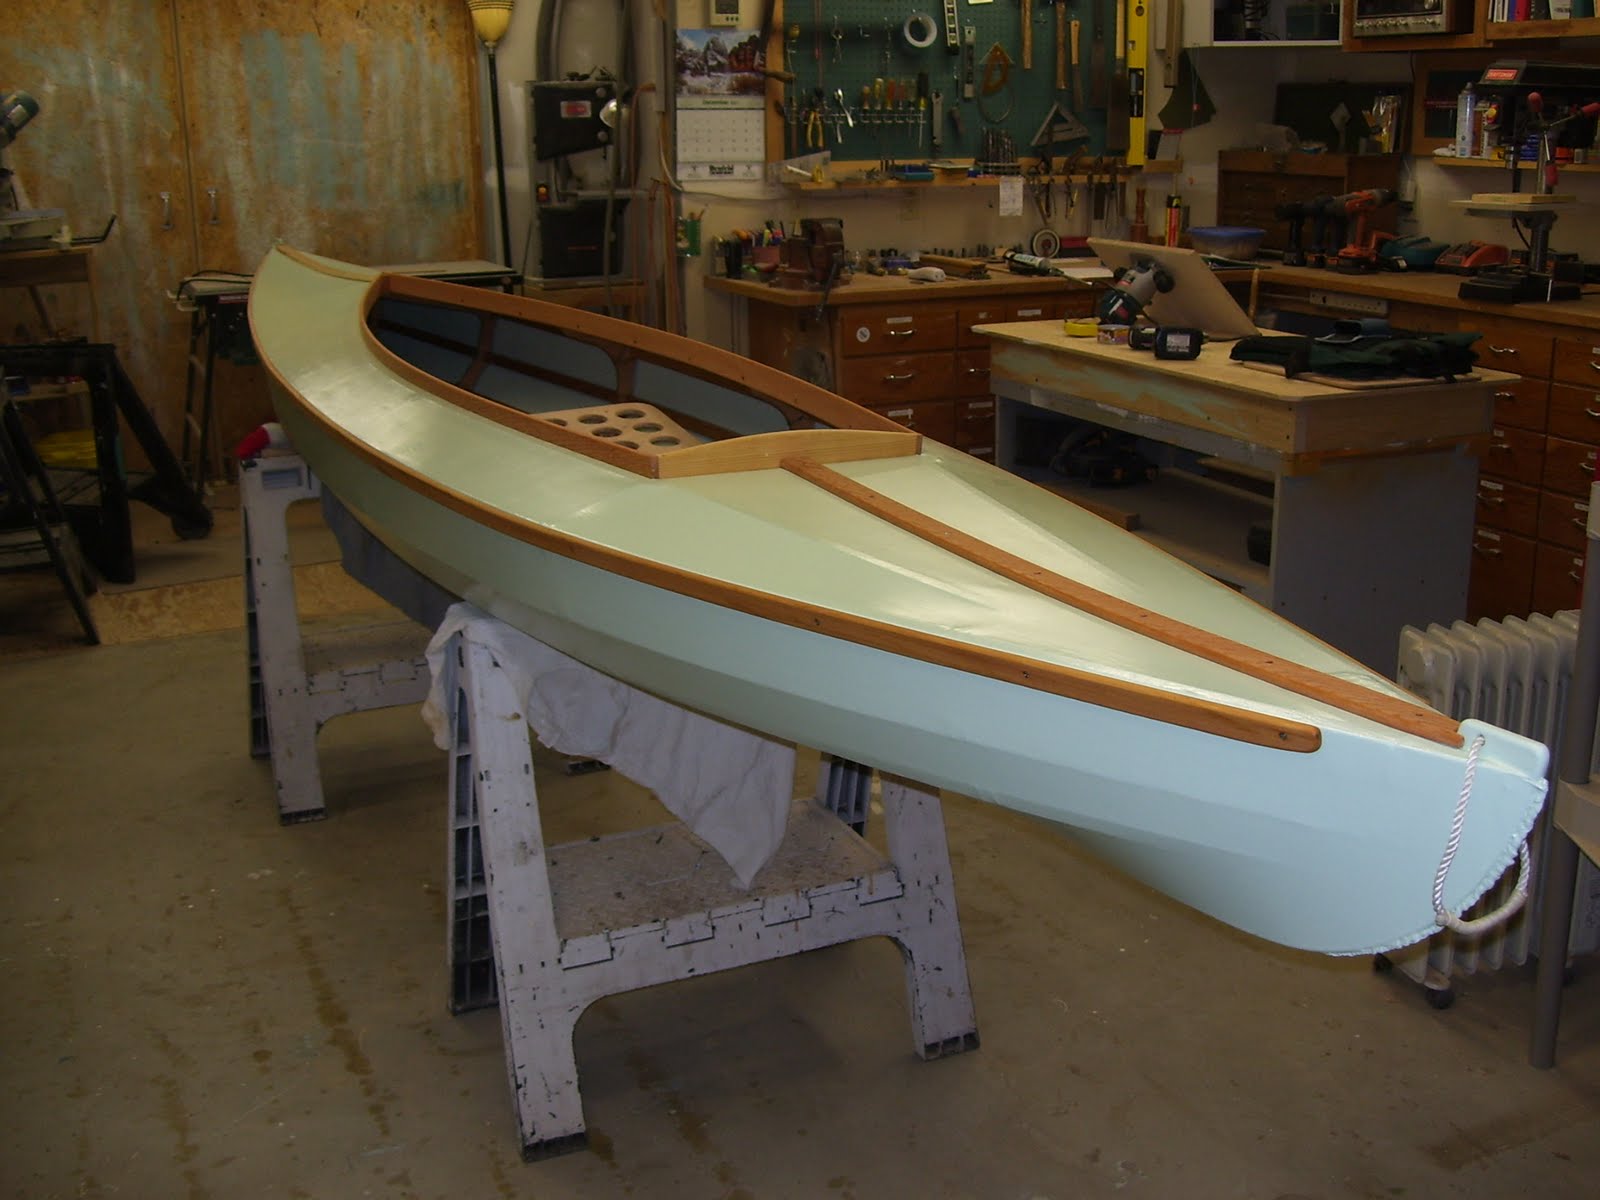  built two skin on frame kayaks, one for a friend and one for himself